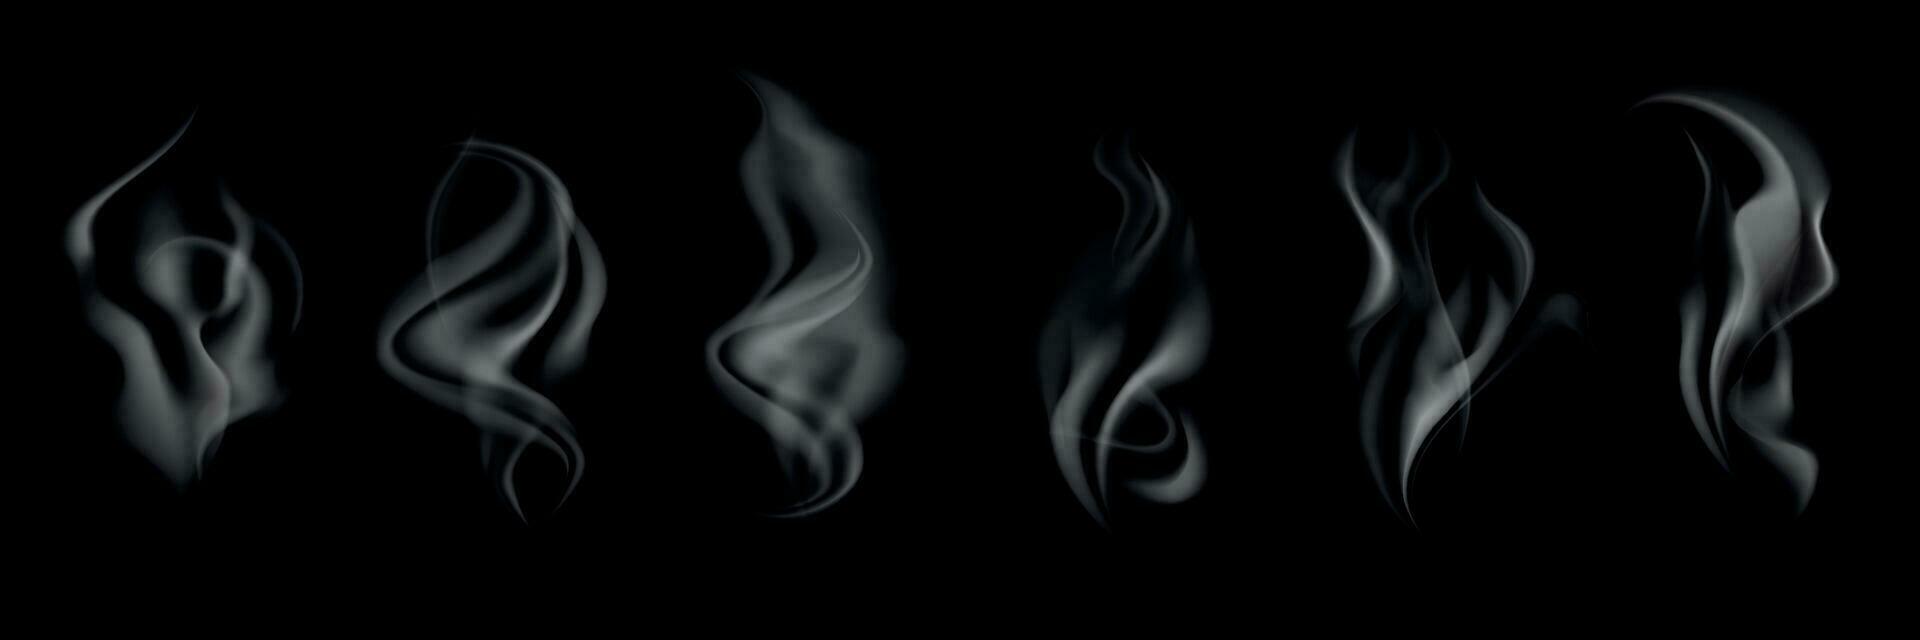 Steam Or Smoke Abstract Shapes On Black vector